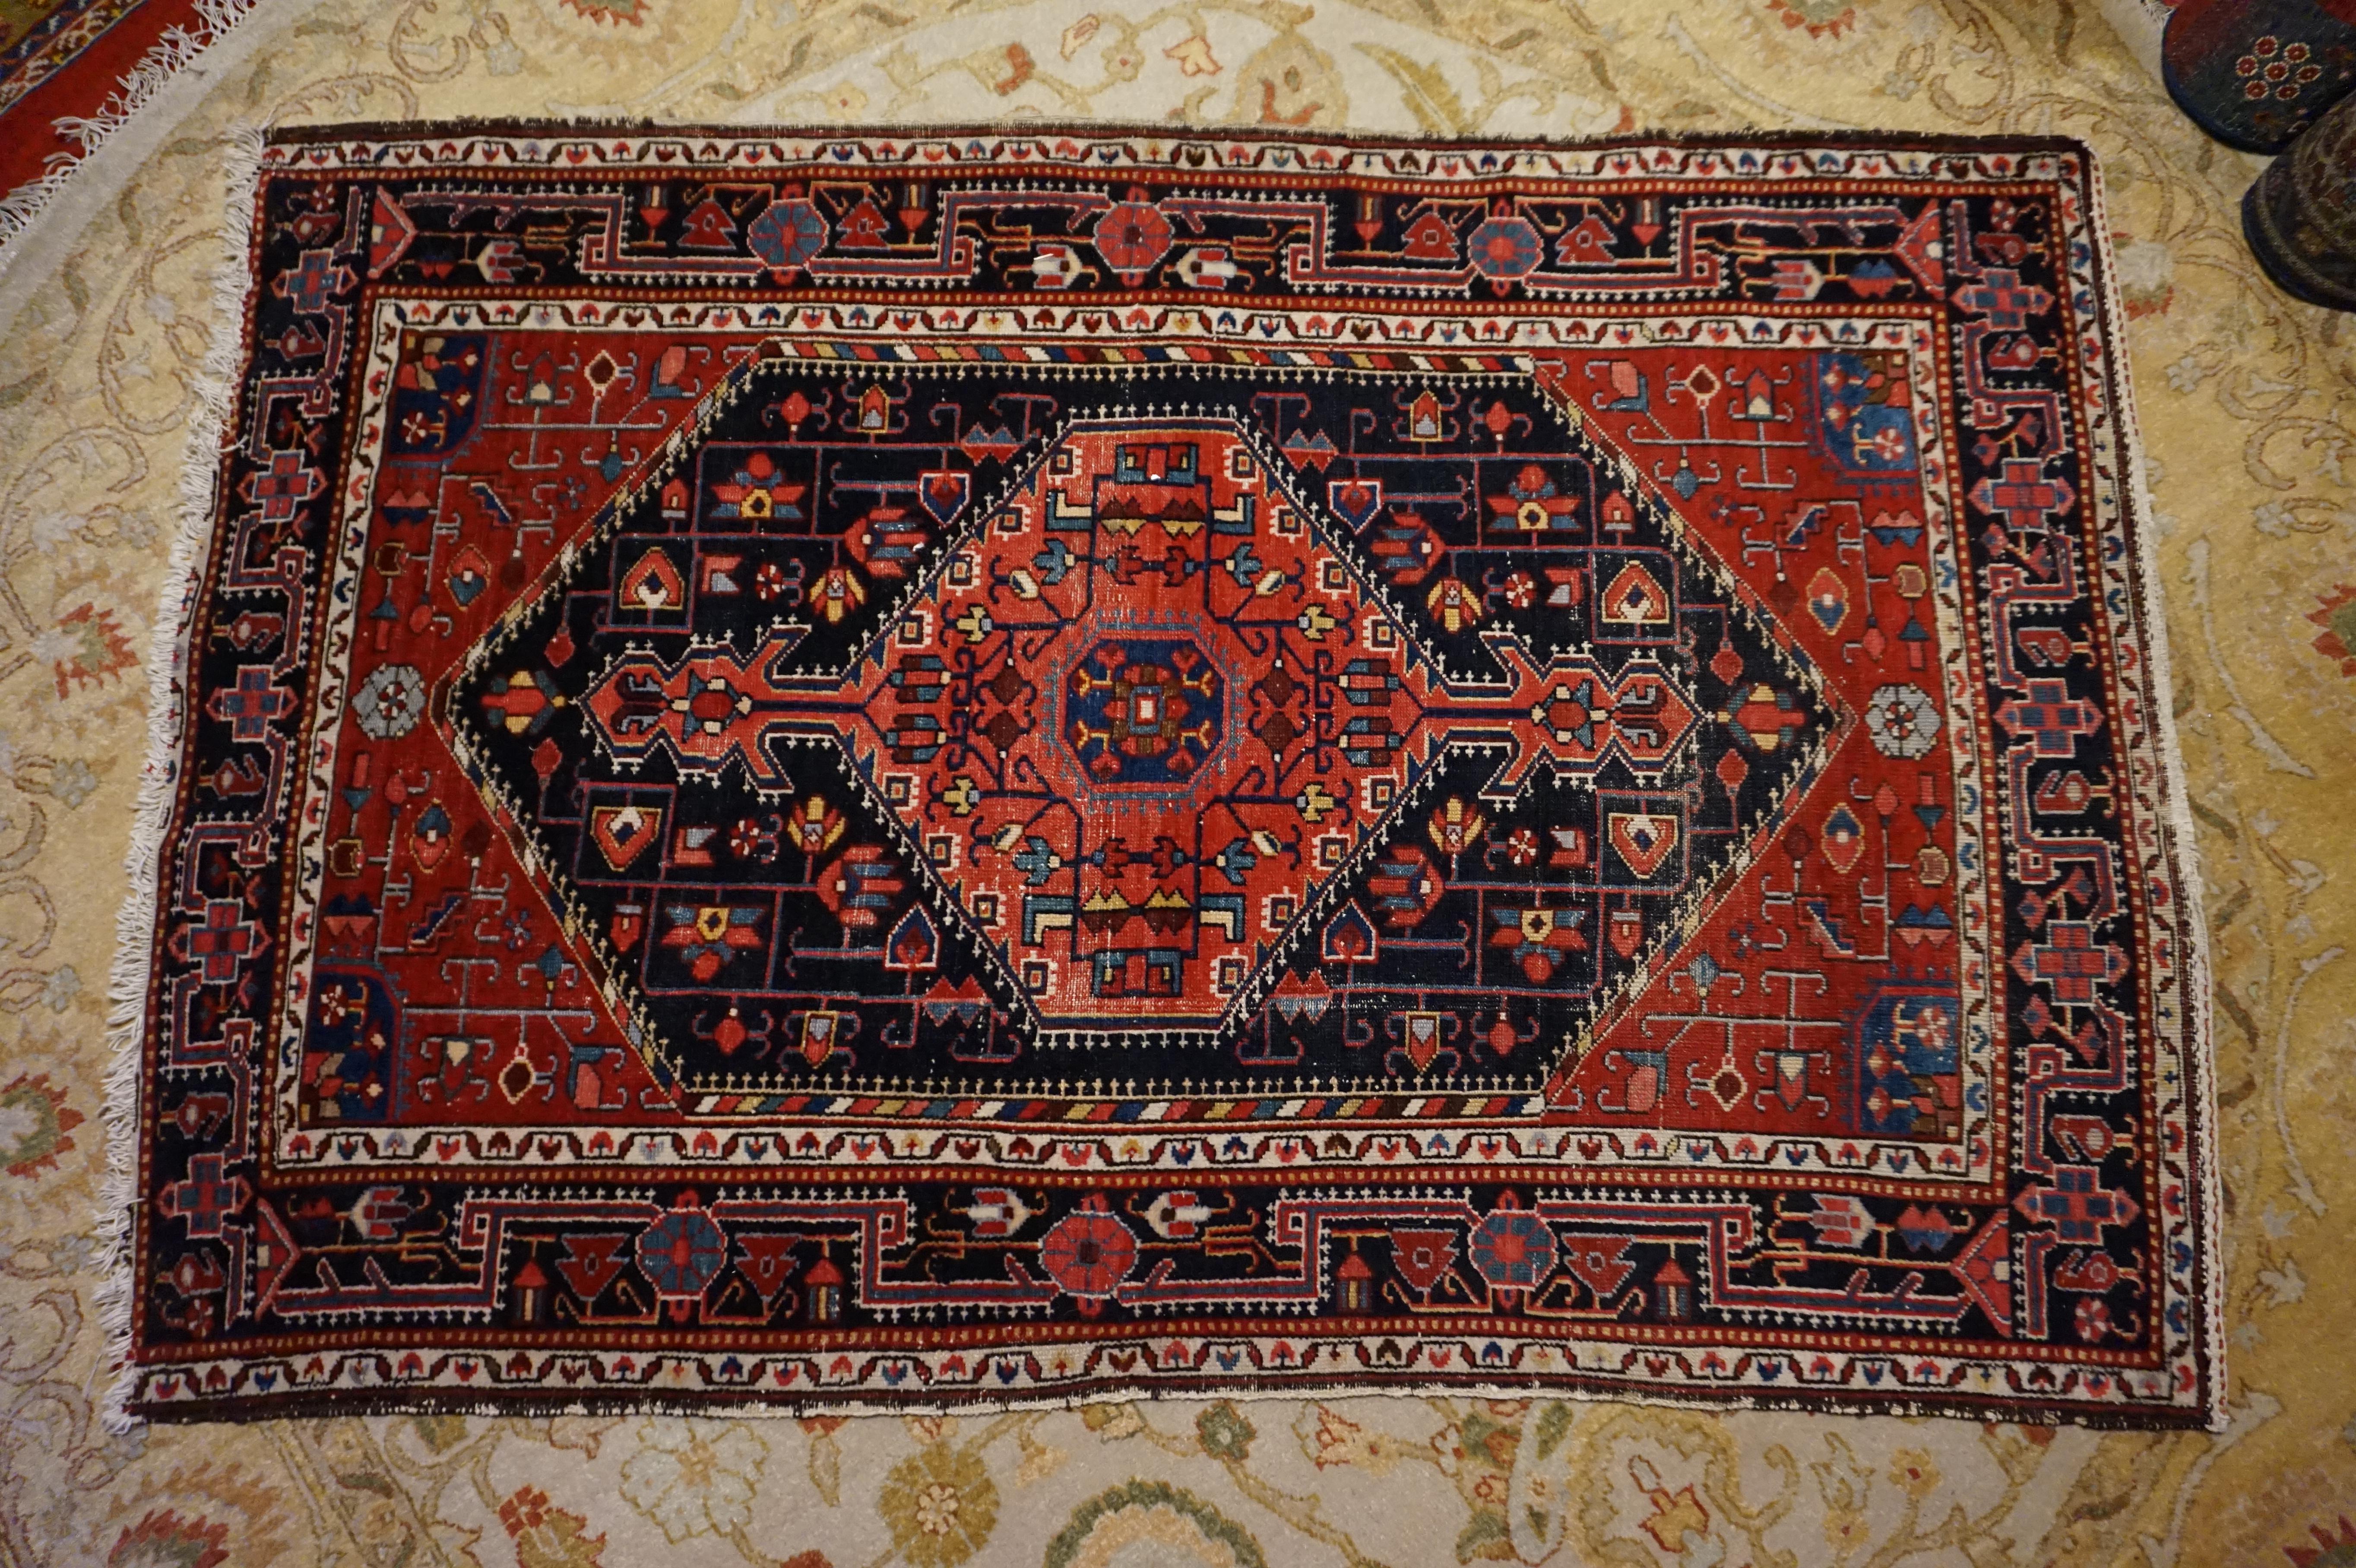 A lovely medley of warm colours and bold tribal pattern highlight this beautifully hand knotted rug. The rug showcases geometric themes with kite medallion and floral patterns in rich reds contrasted with black borders. It makes a statement when